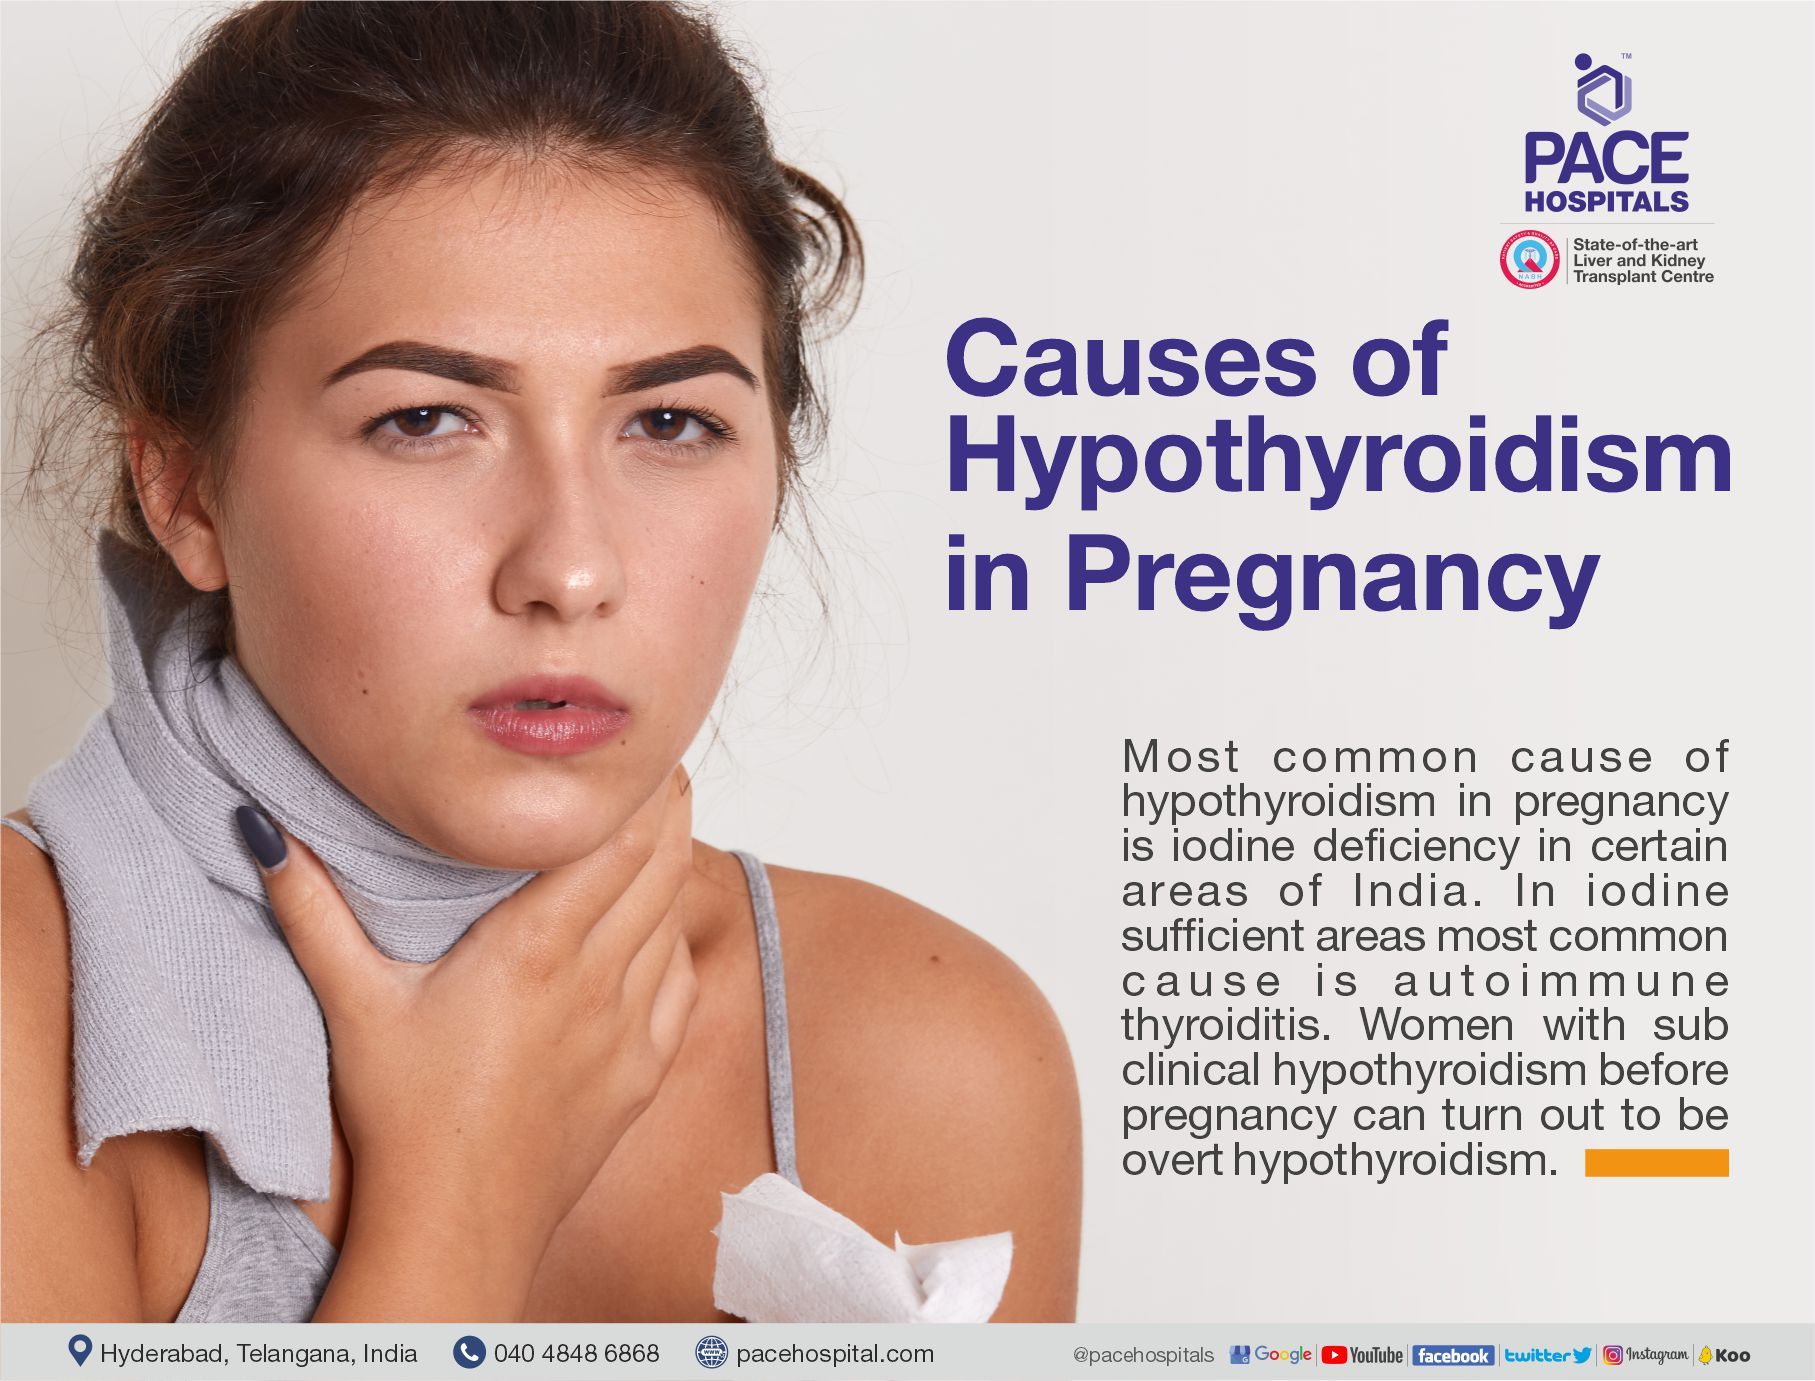 Causes of hypothyroidism in pregnancy | Pace Hospitals